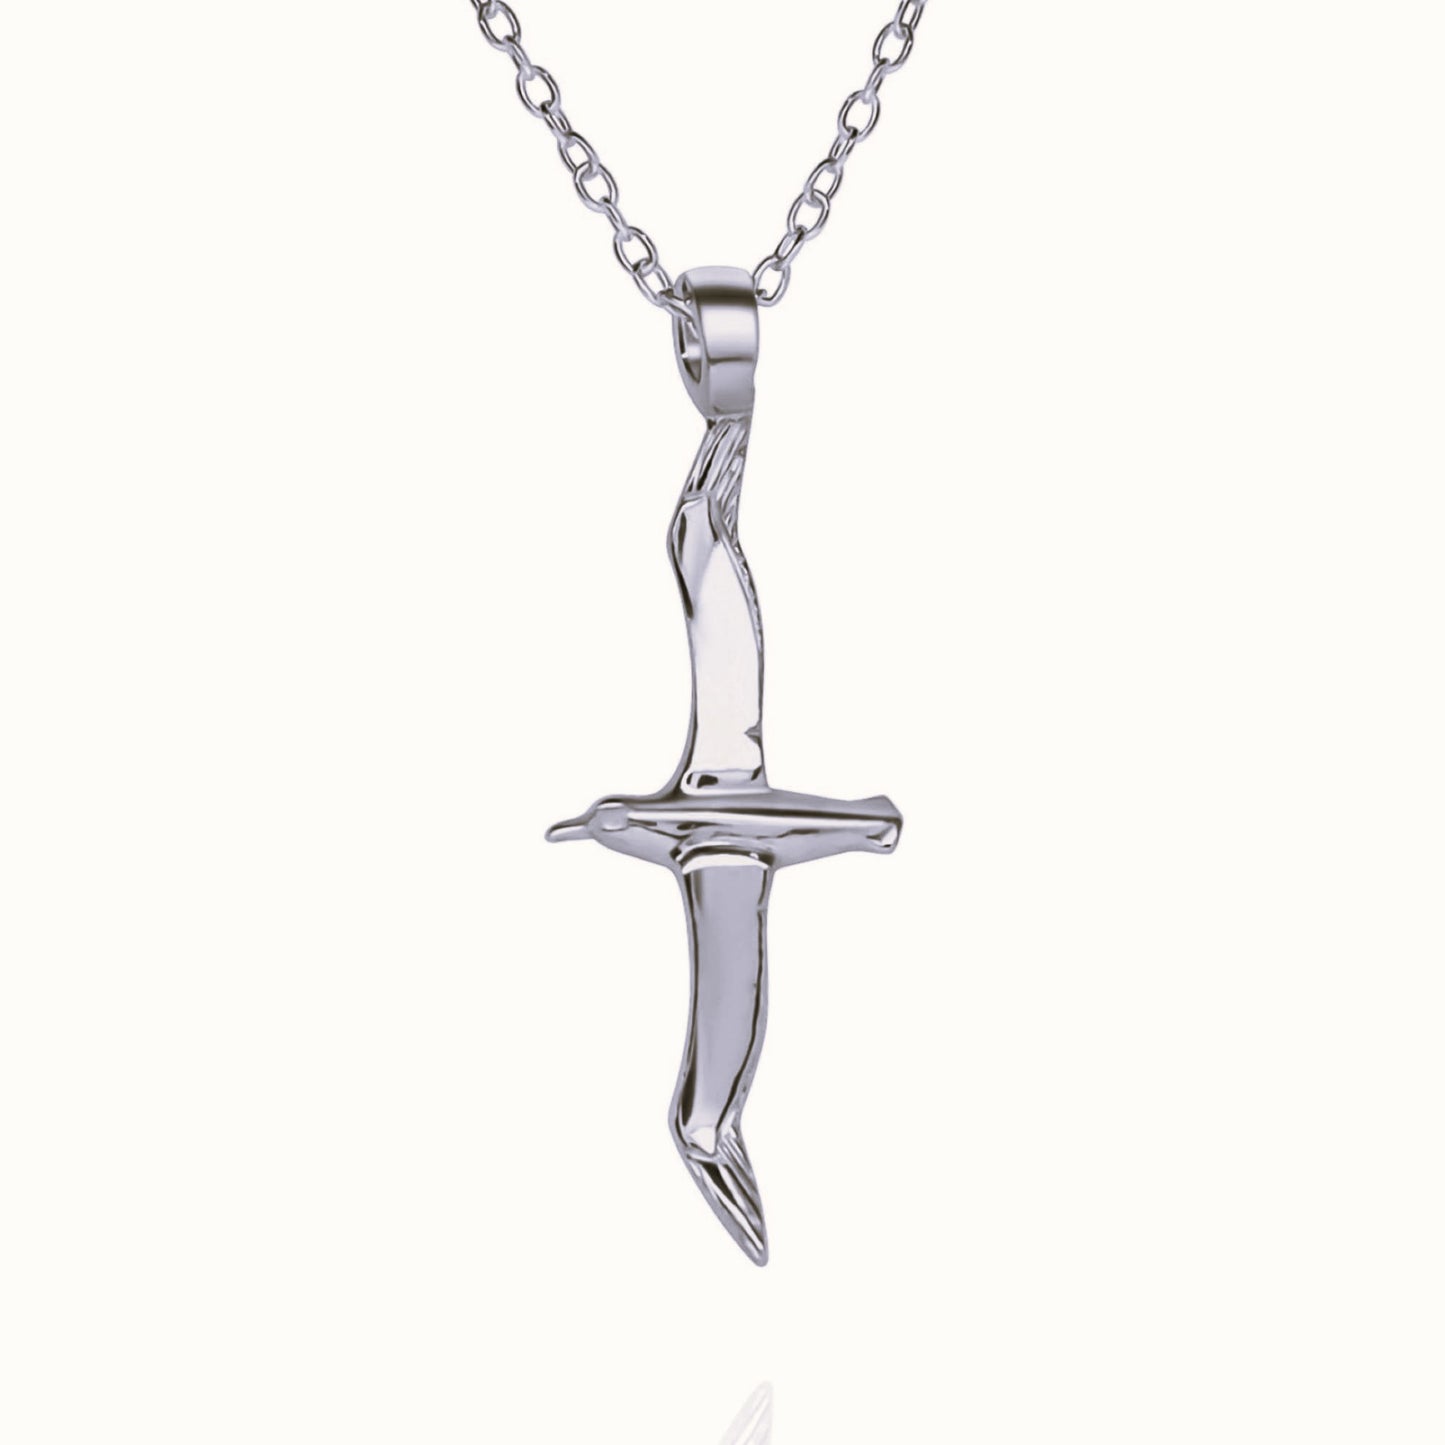 Platinum Albatross charm with a solid platinum chain. Made to order. © Adrian Ashley